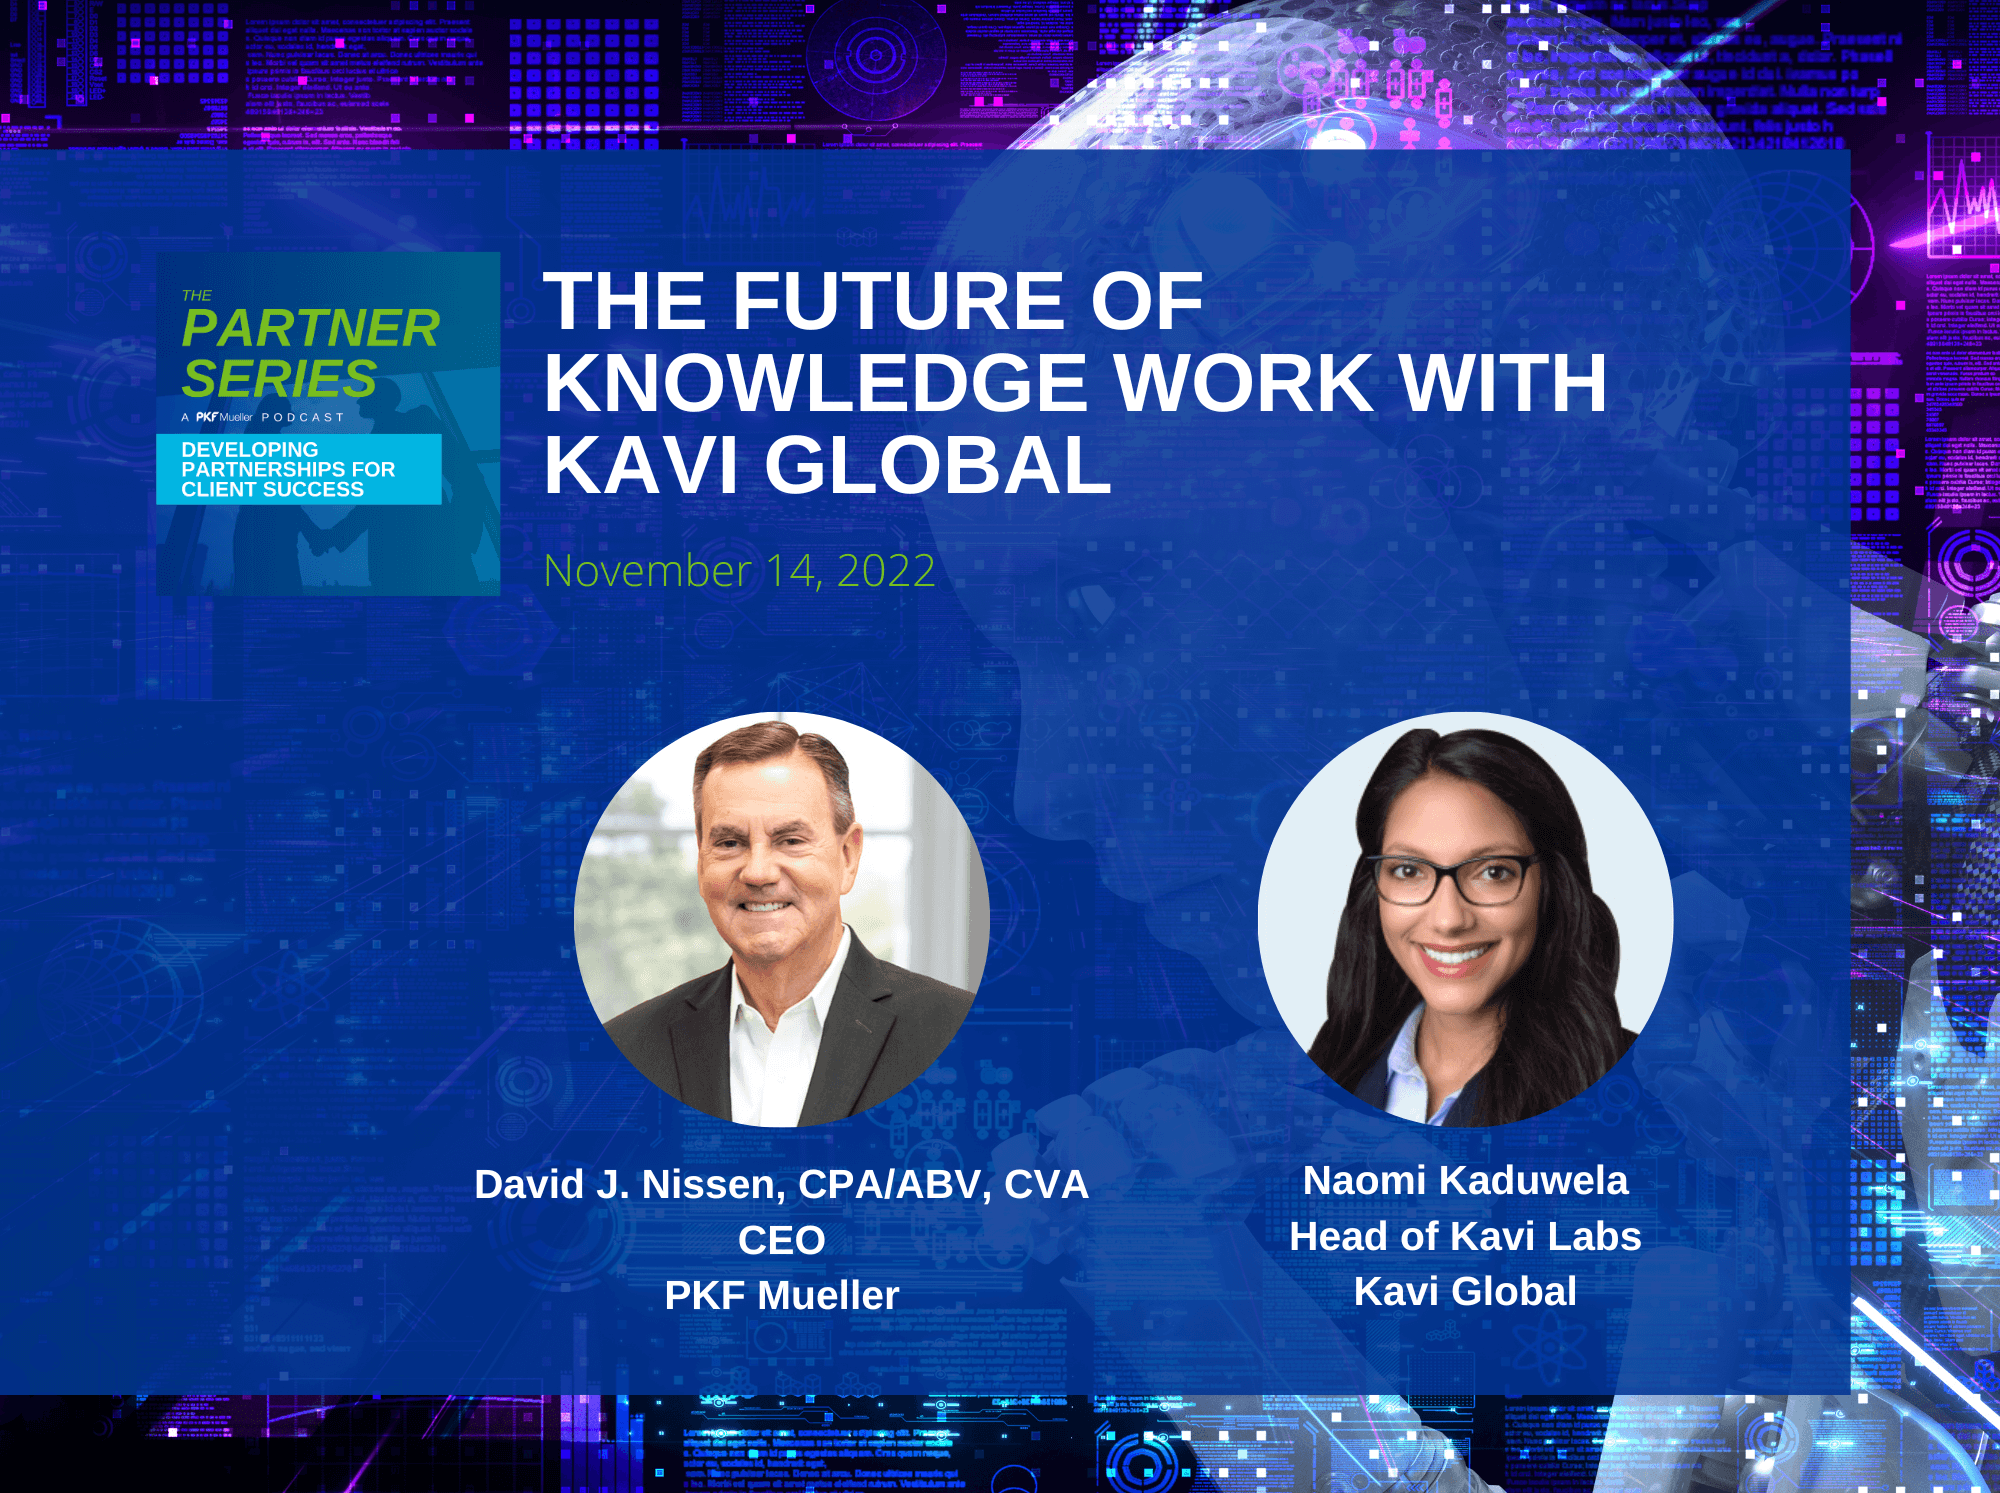 The Future of Knowledge Work with Kavi Global